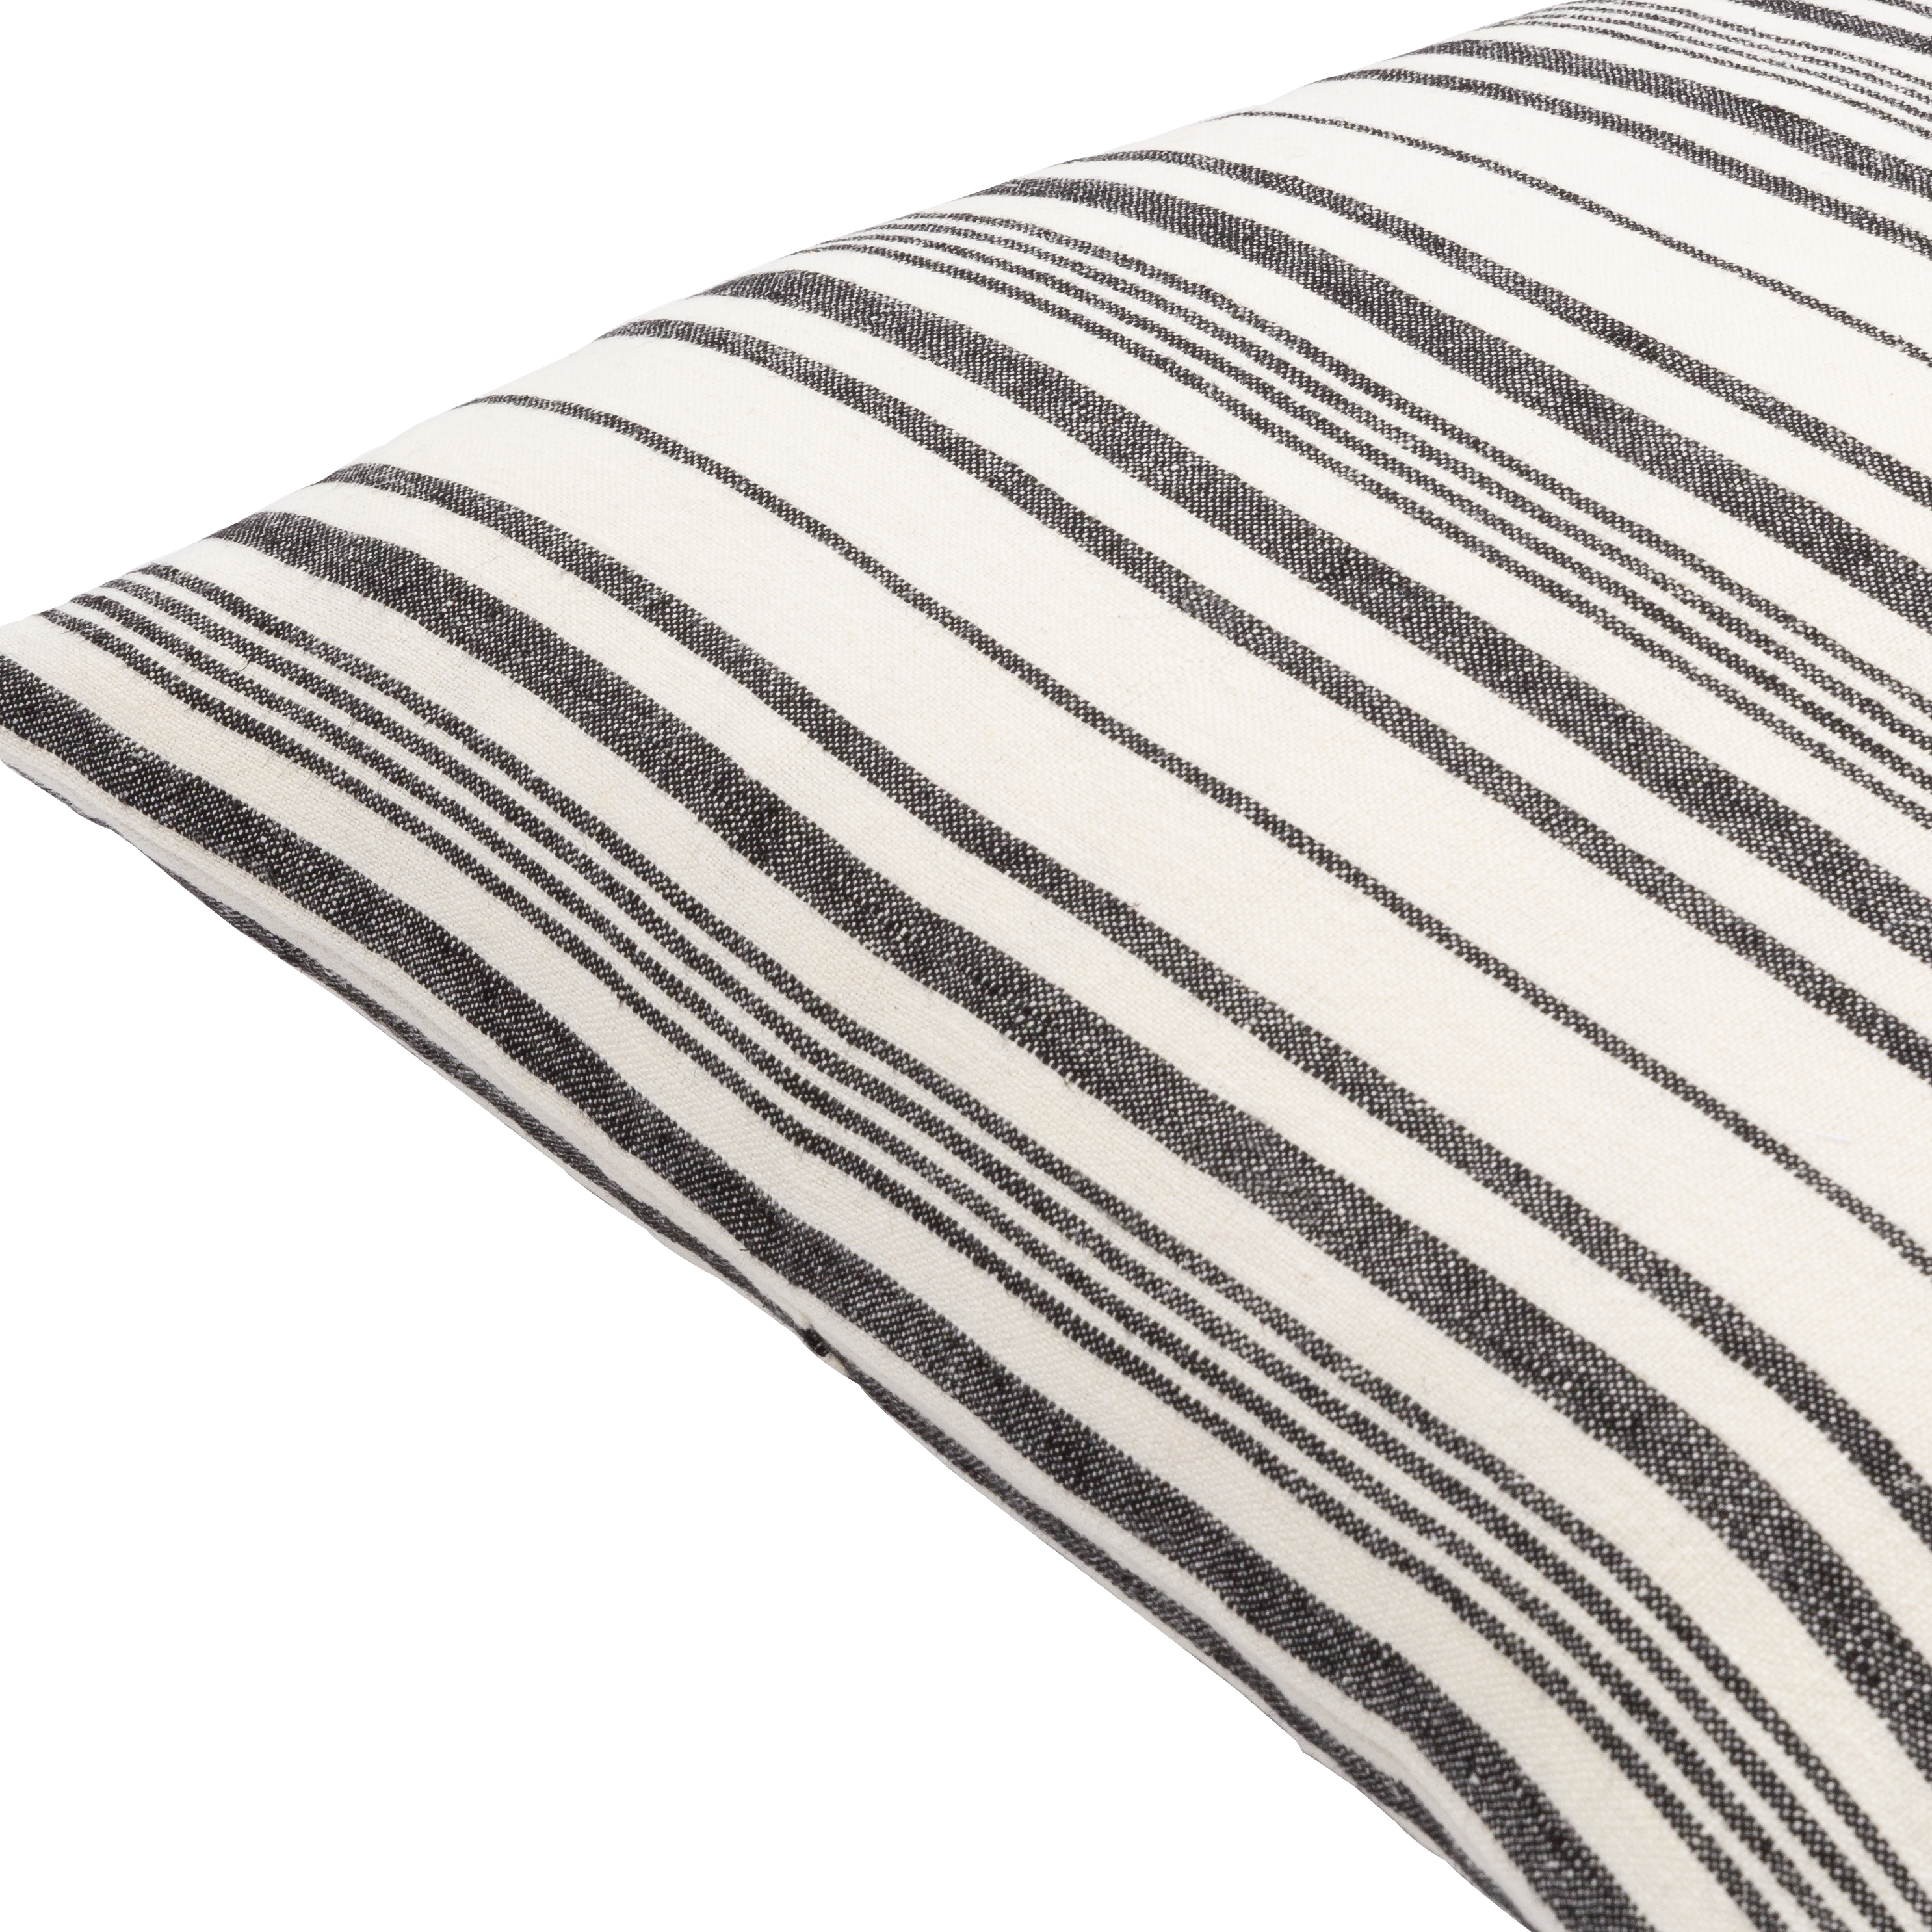 Linen Stripe Buttoned Throw Pillow, 18" x 18", with down insert - Image 1